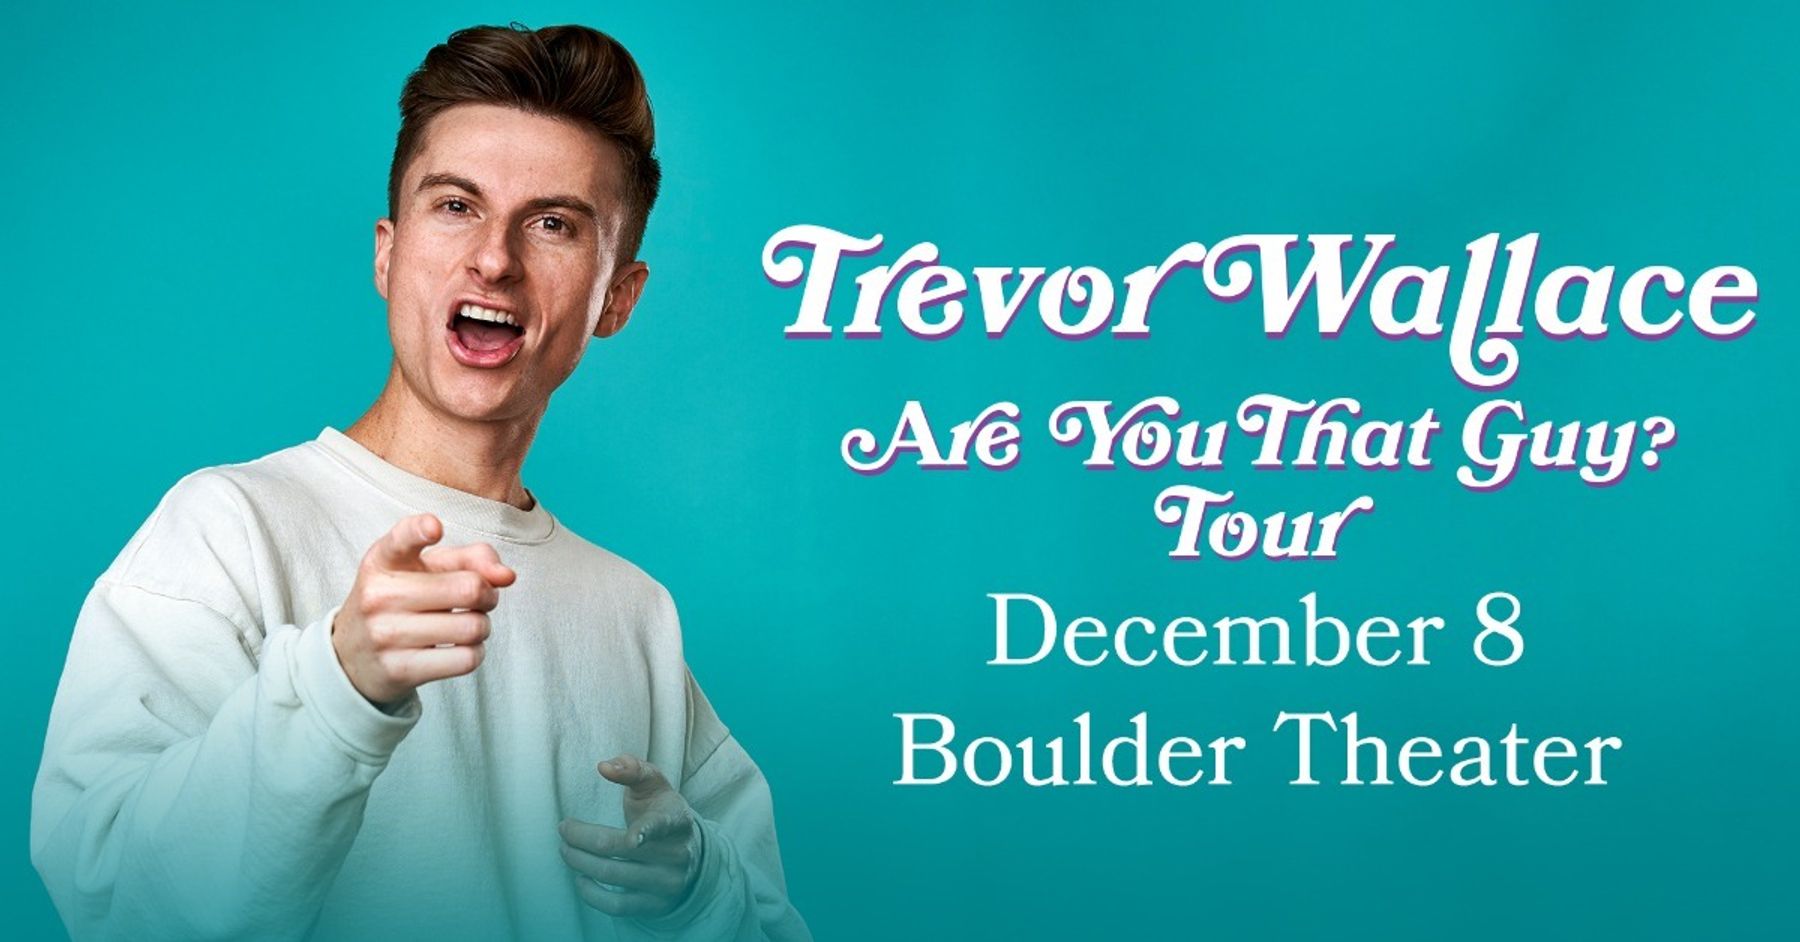 Are You That Guy? Tour Trevor Wallac Downtown Boulder, CO